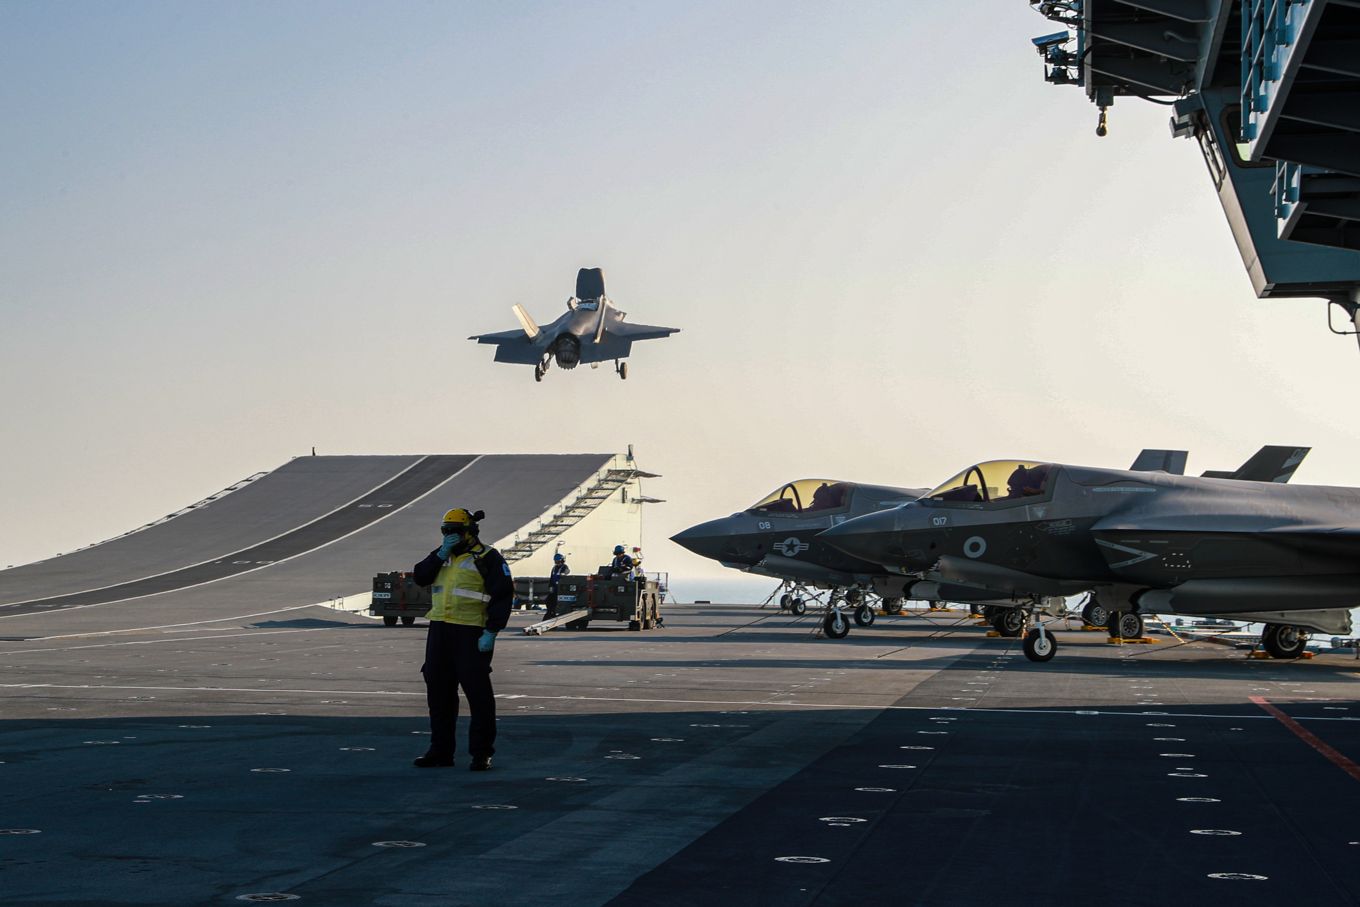 Image shows F35 aircraft taking off from carrier